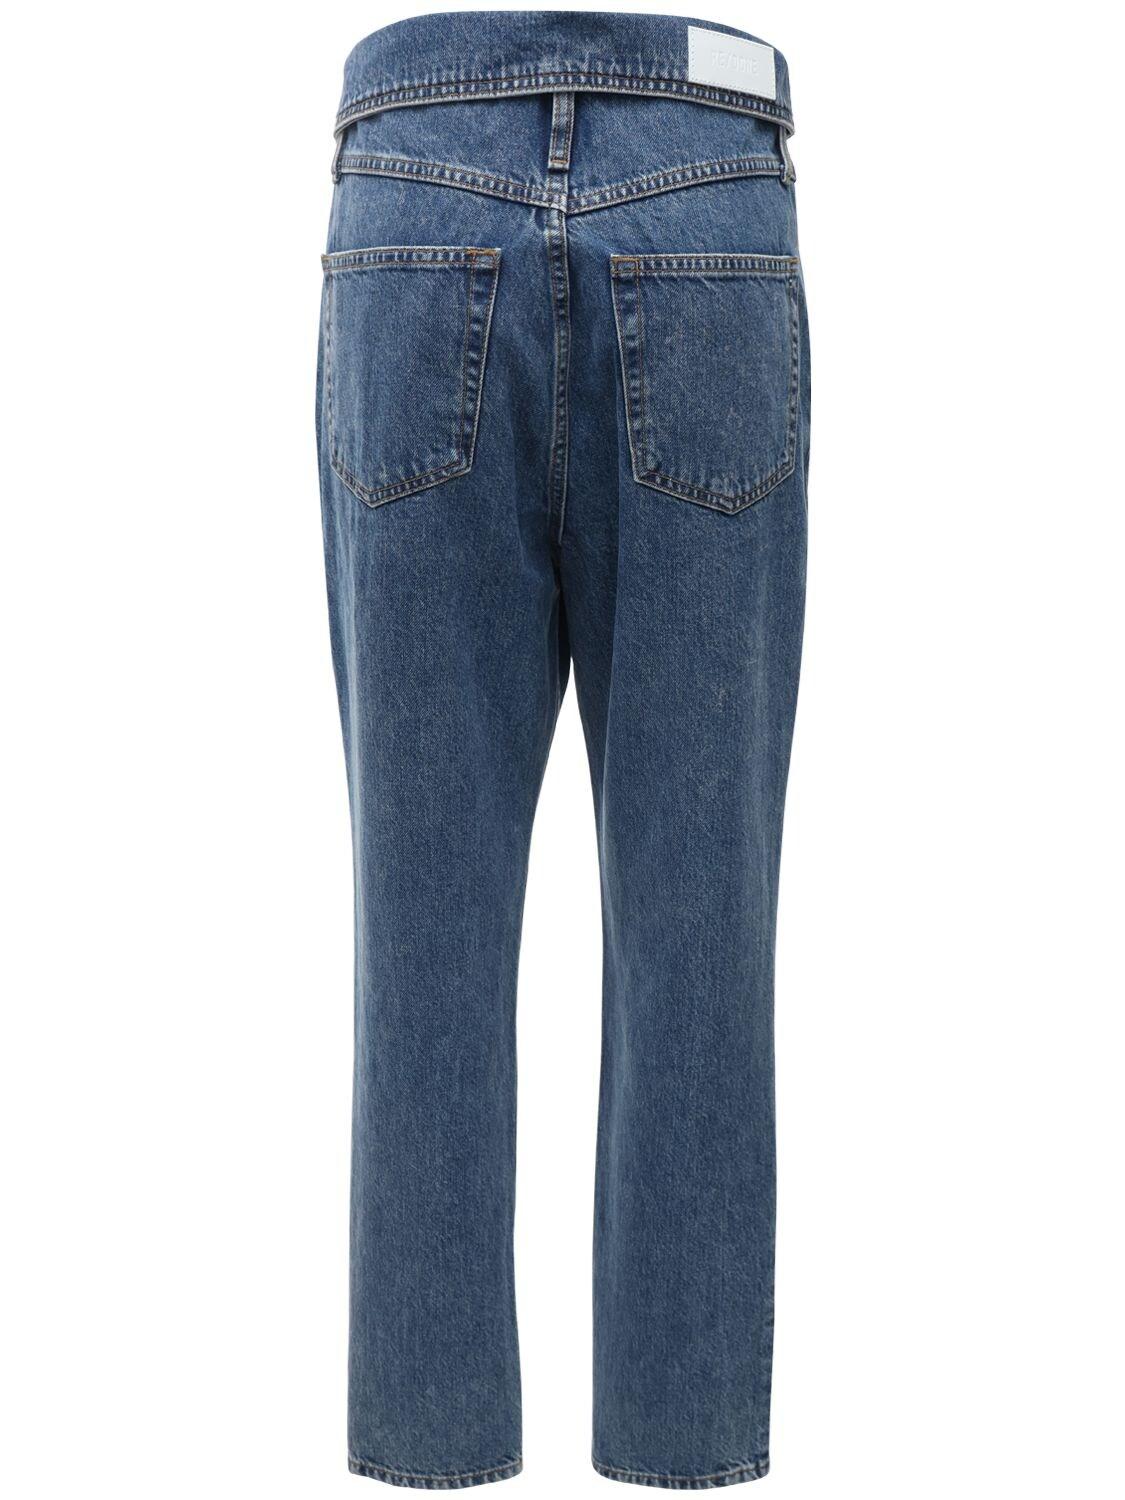 RE/DONE Denim 80s Fold Over Jeans in Light Blue (Blue) | Lyst